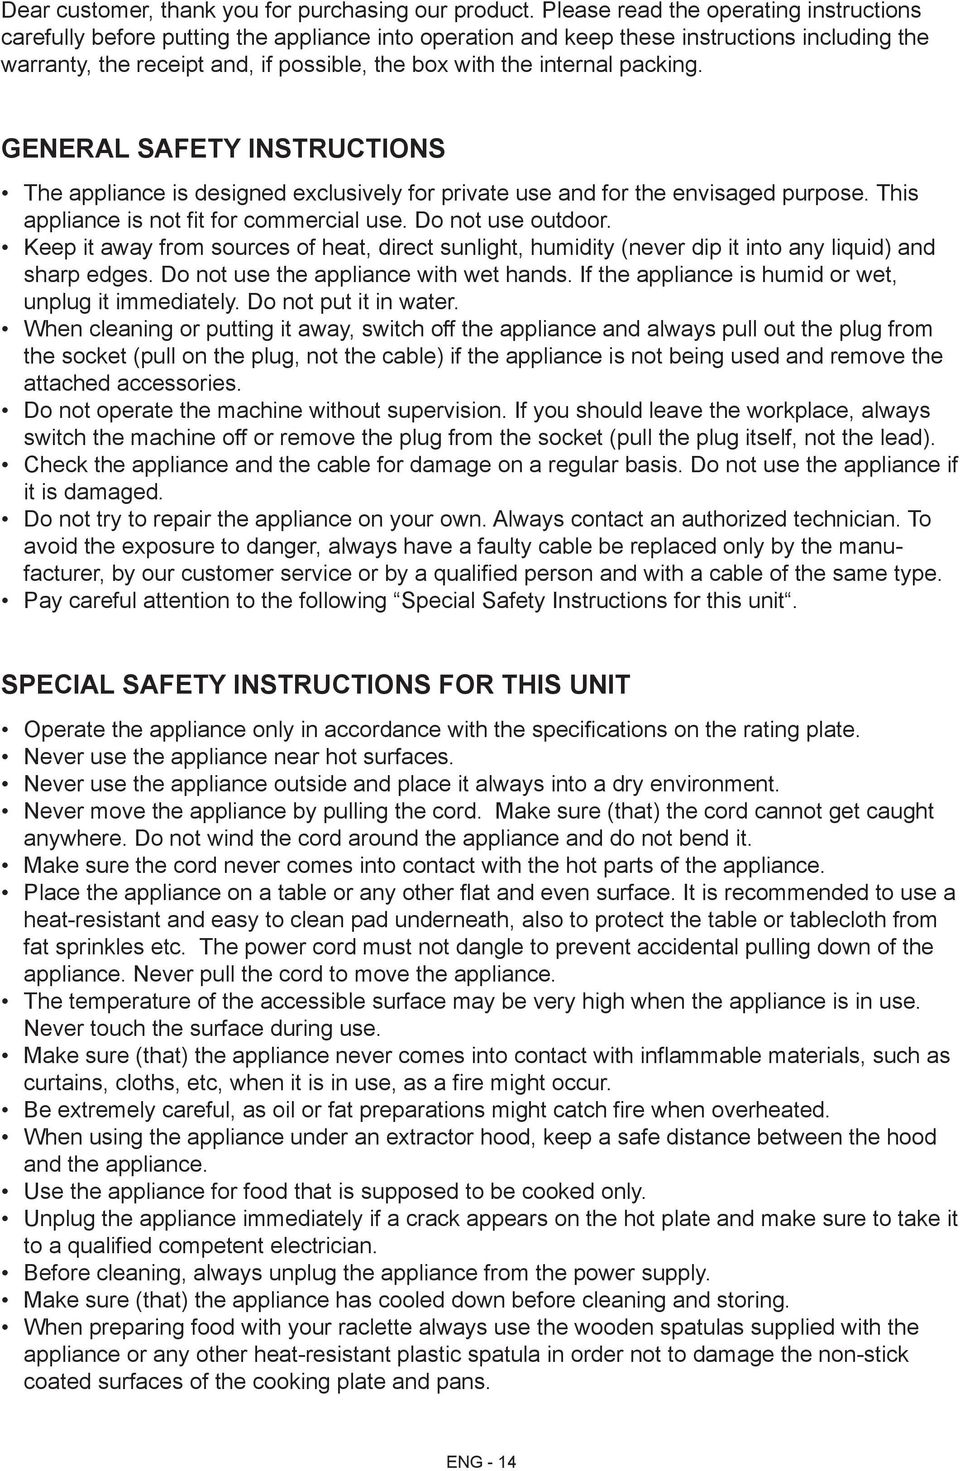 internal packing. GENERAL SAFETY INSTRUCTIONS The appliance is designed exclusively for private use and for the envisaged purpose. This appliance is not fit for commercial use. Do not use outdoor.